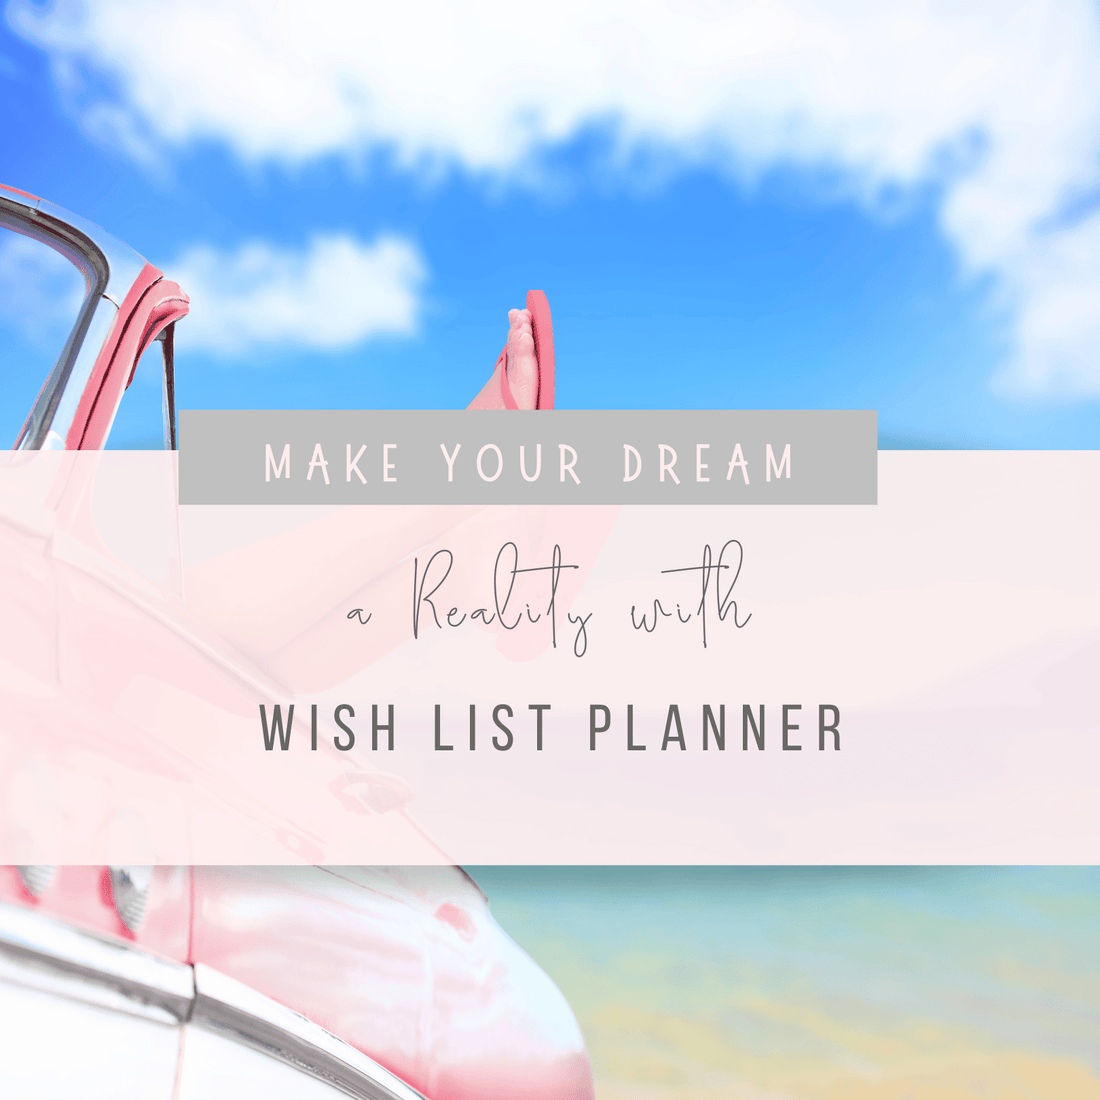 Make Your Dreams a Reality with Our Wish List Planner